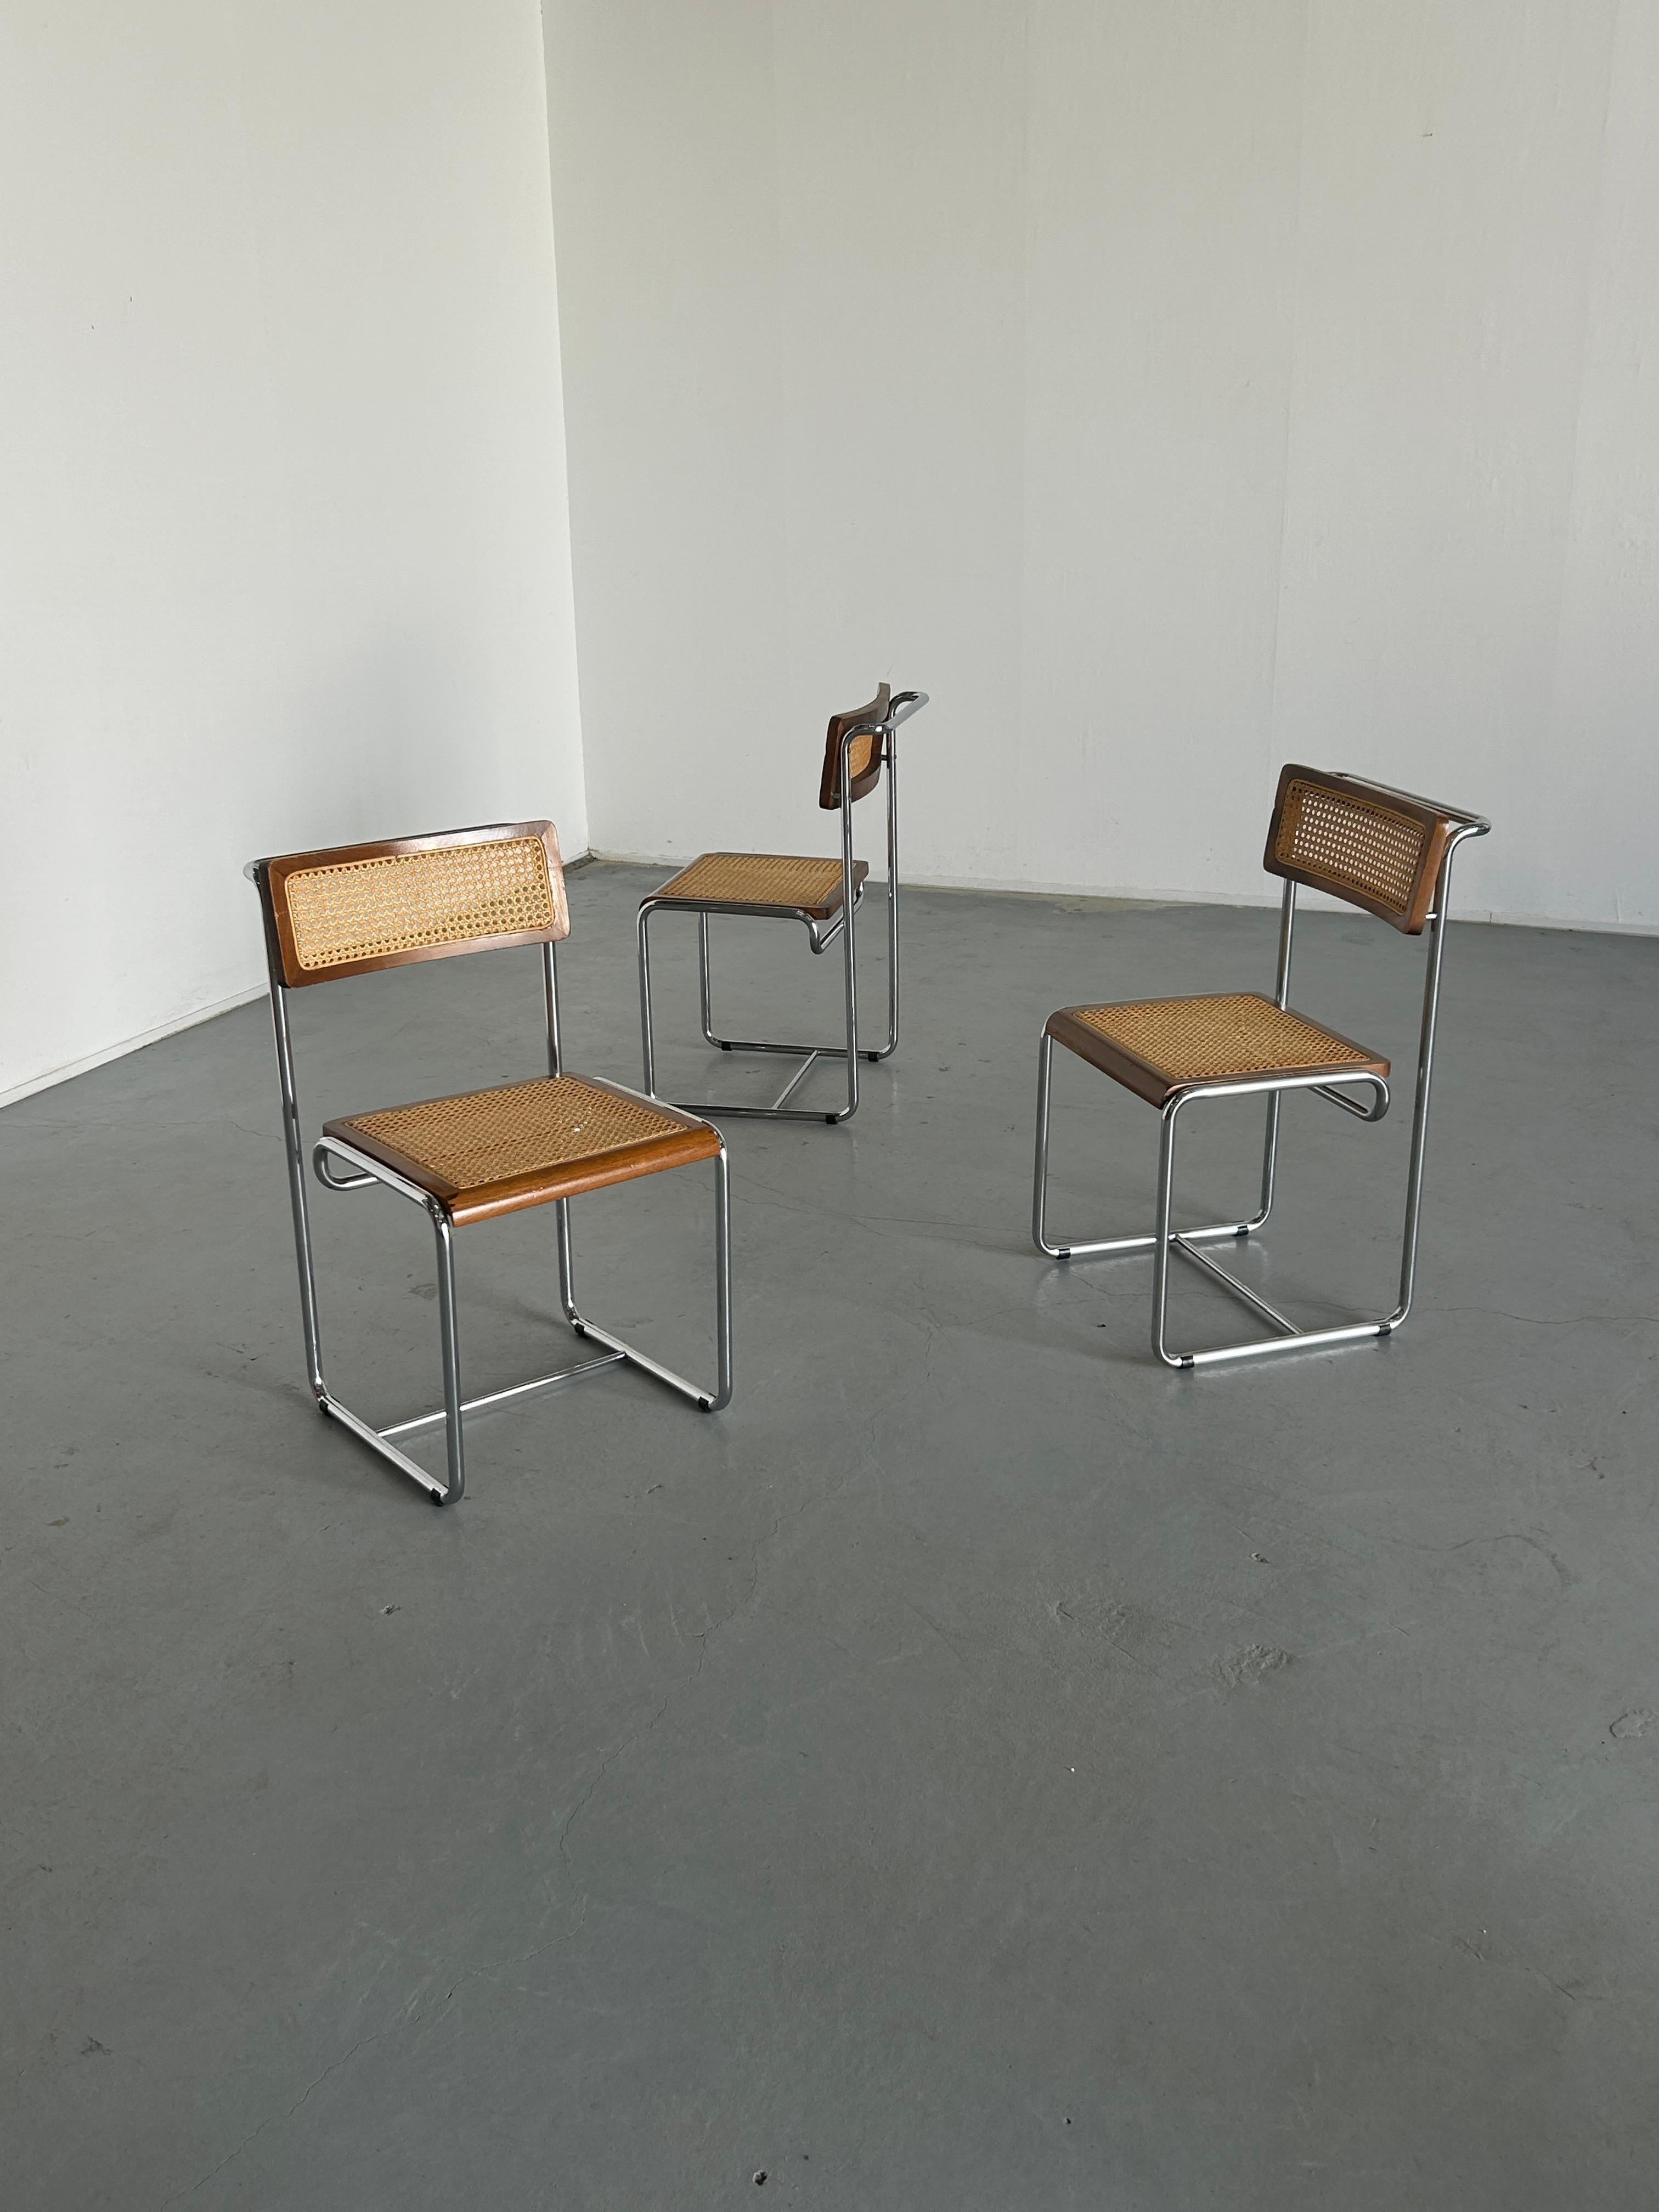 Unique and amazing Mid-Century-Modern constructivist dining chairs, in bent chromed tubular steel structure with wickered wooden seat and backrest. 
Elegant and simple design resembling a chair prototype of the school of Bauhaus. 
Early 1960s